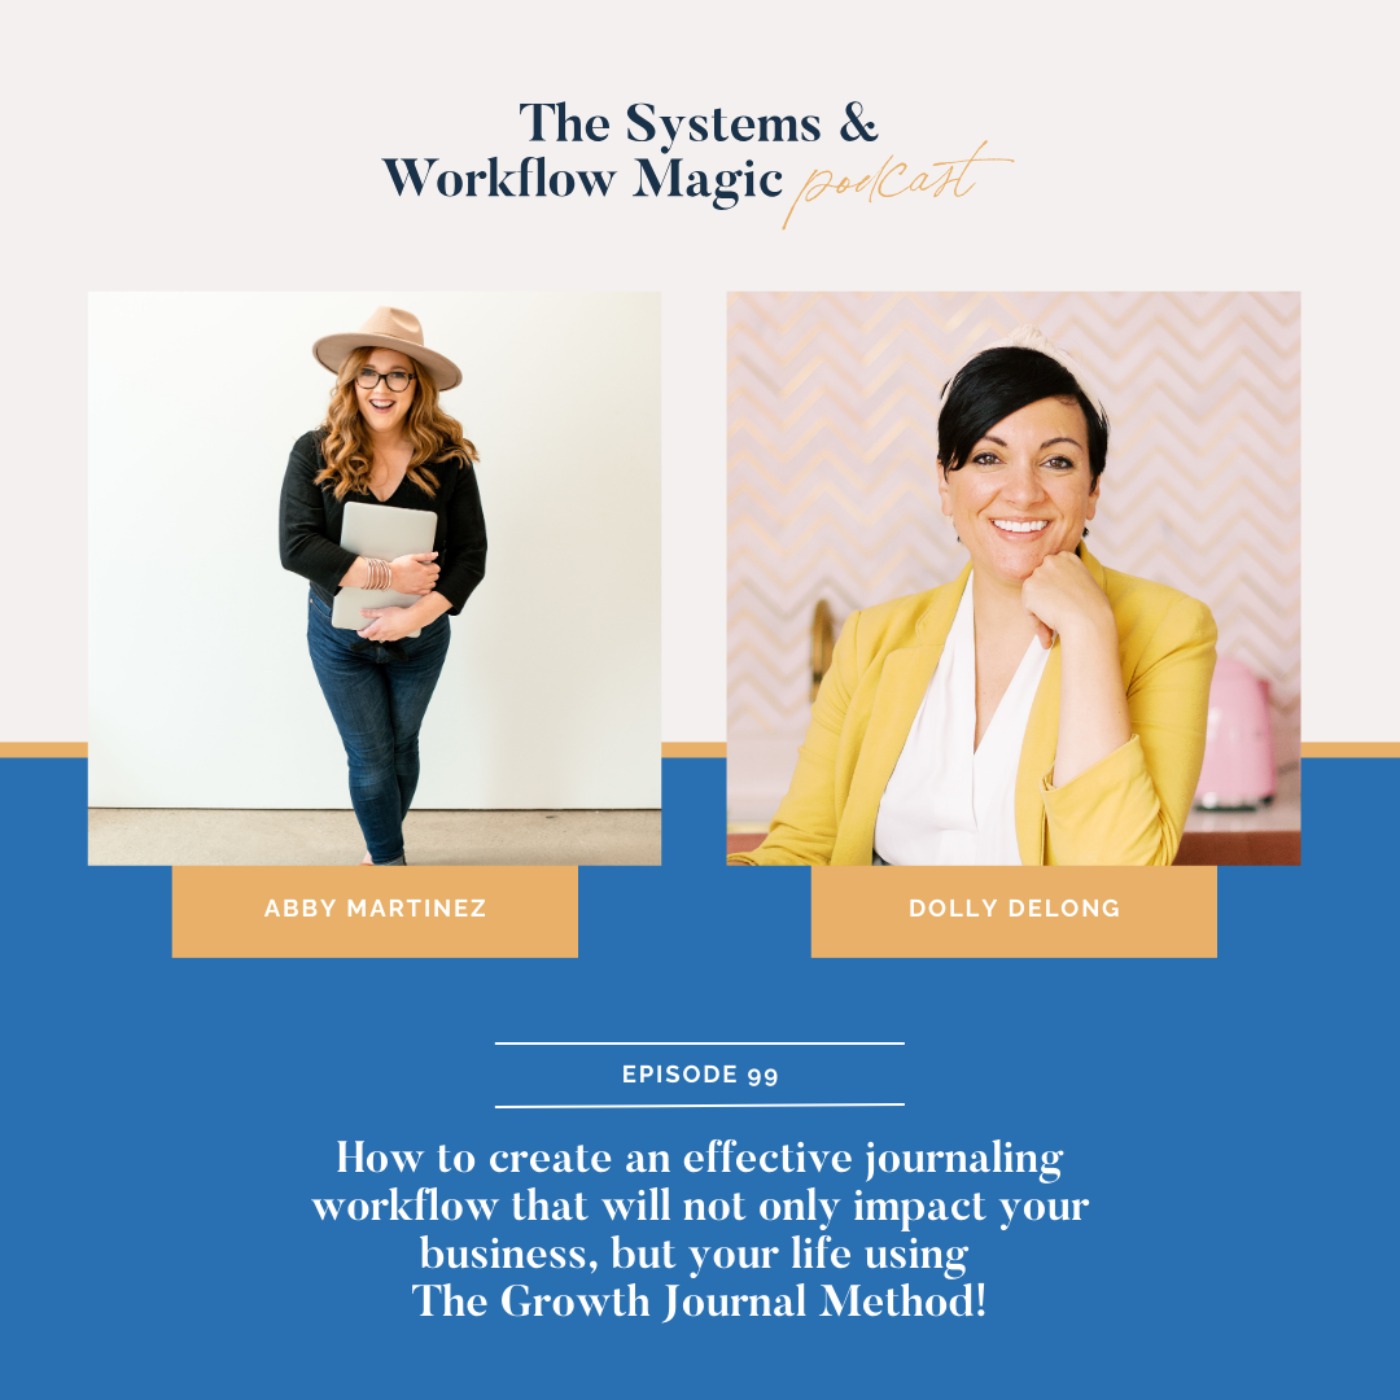 99: How to create an effective journaling workflow that will not only impact your business, but your life using The Growth Journal Method!